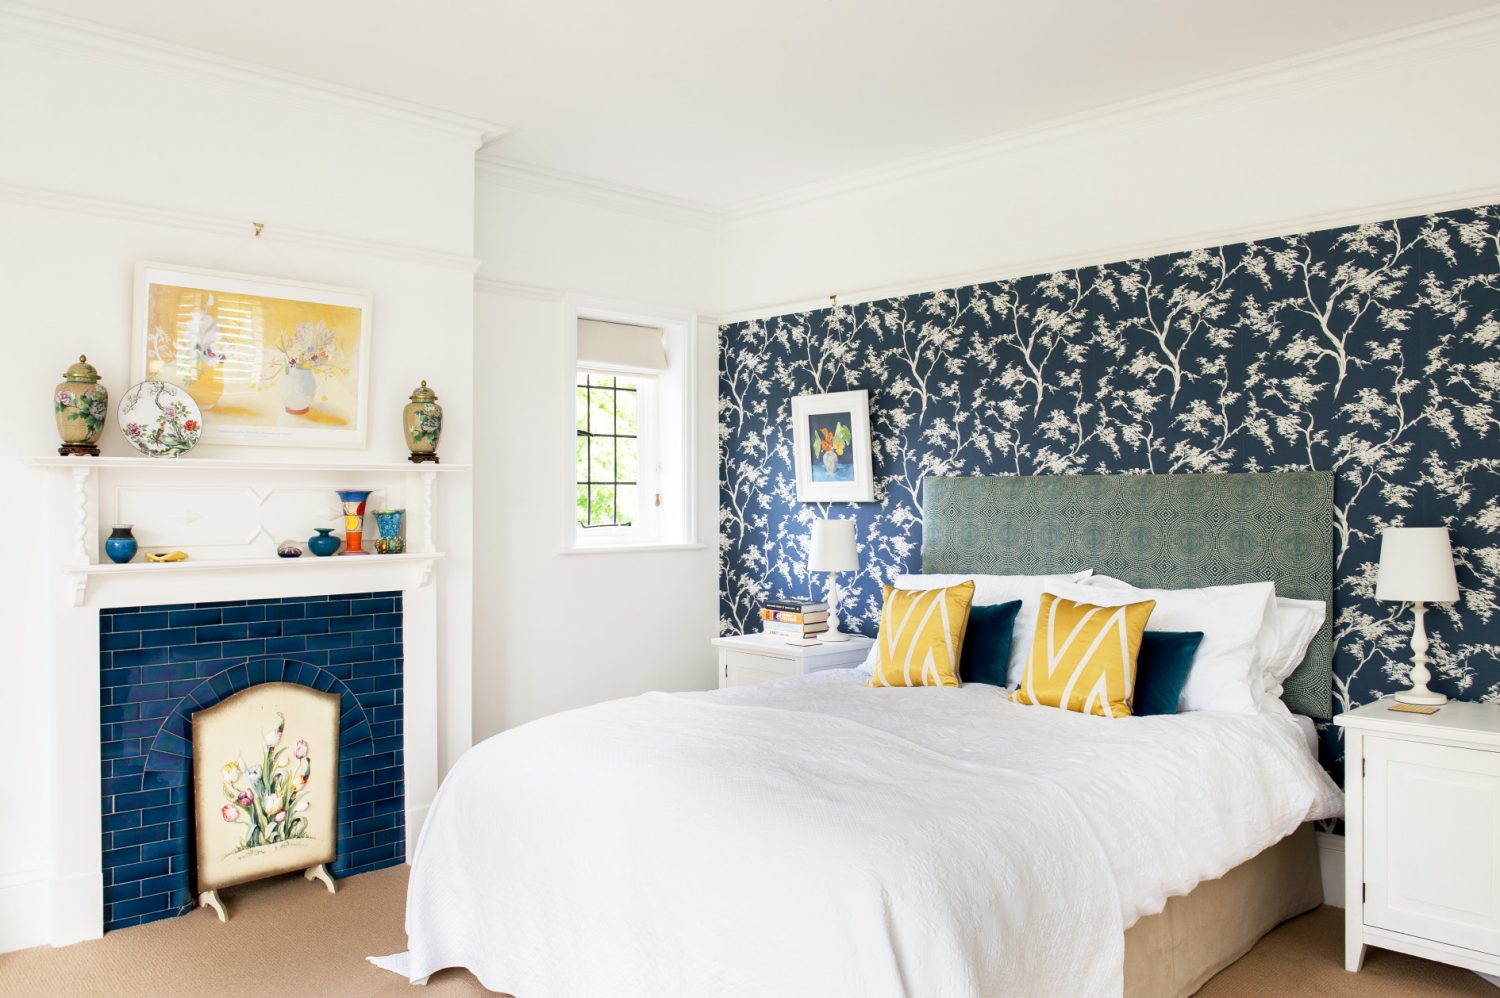 With off white walls on three sides and a lovely shade of indigo patterned wallpaper on the fourth – which picks up the blue tiles of the fireplace – it is a very calm room